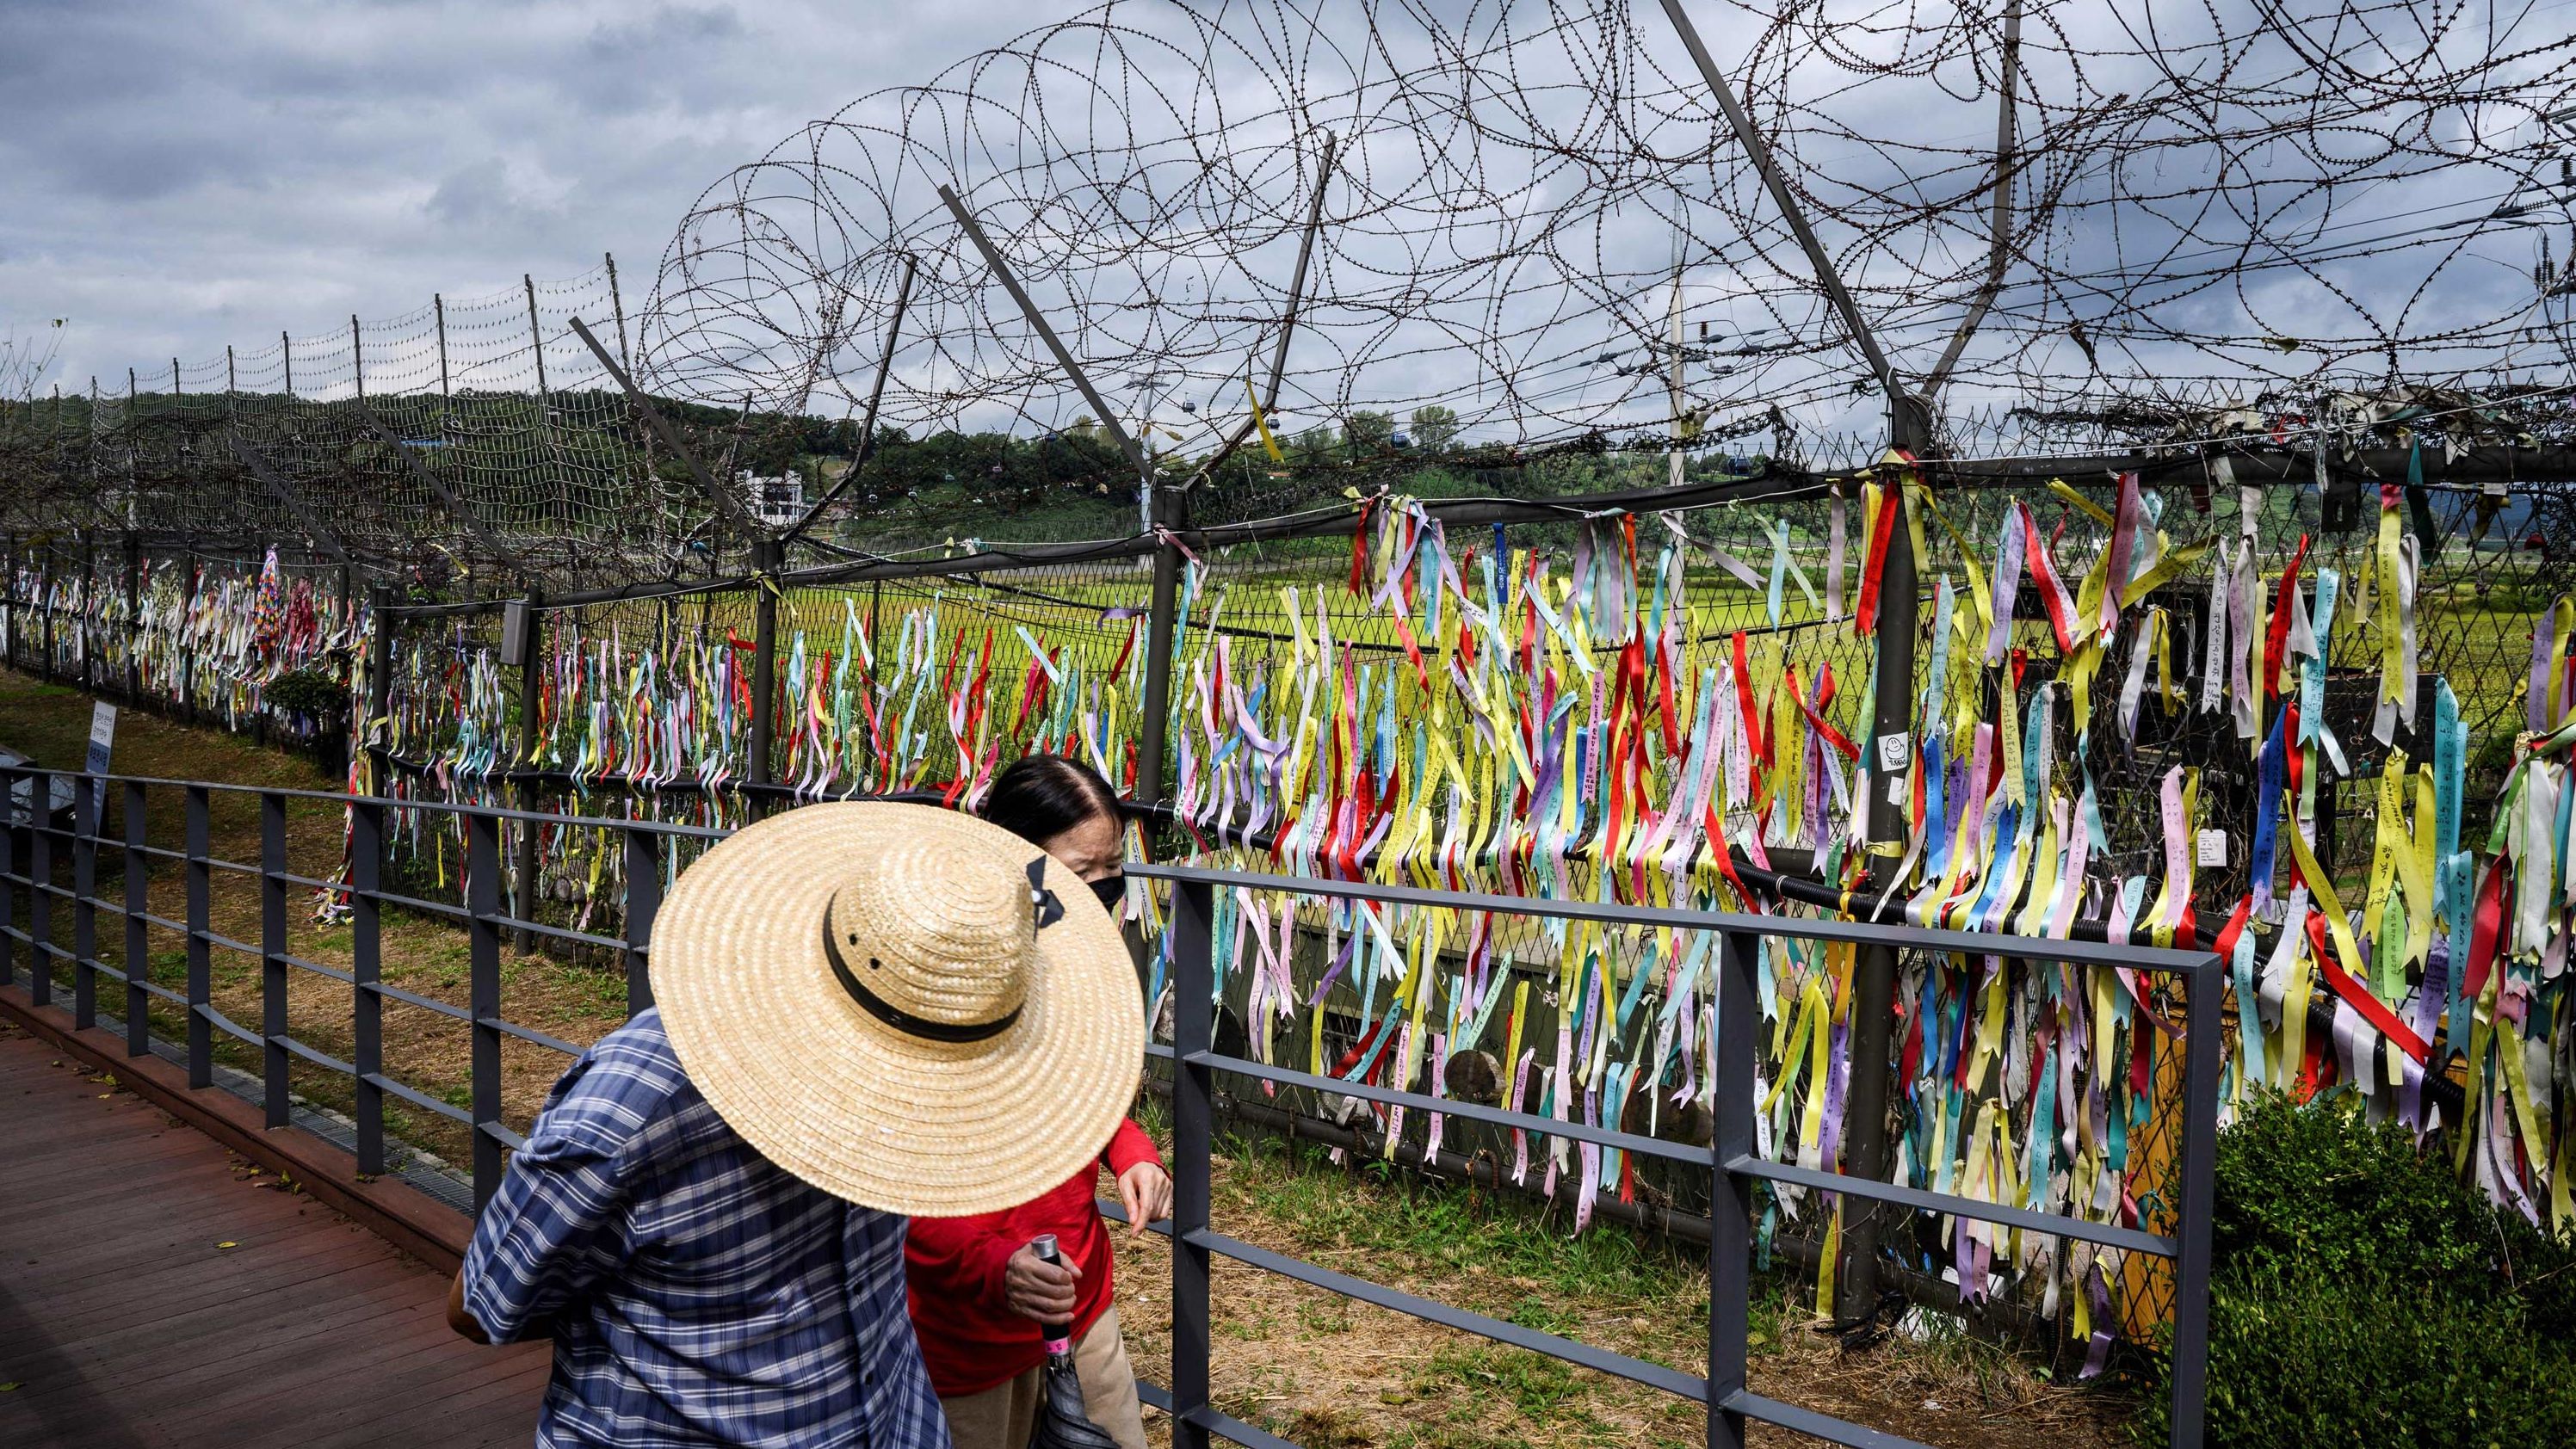 Visitors walk past a fence adorned with ribbons at the Imjingak 'peace park' near the Demilitarized Zone (DMZ) separating North and South Korea on September 21, 2021.